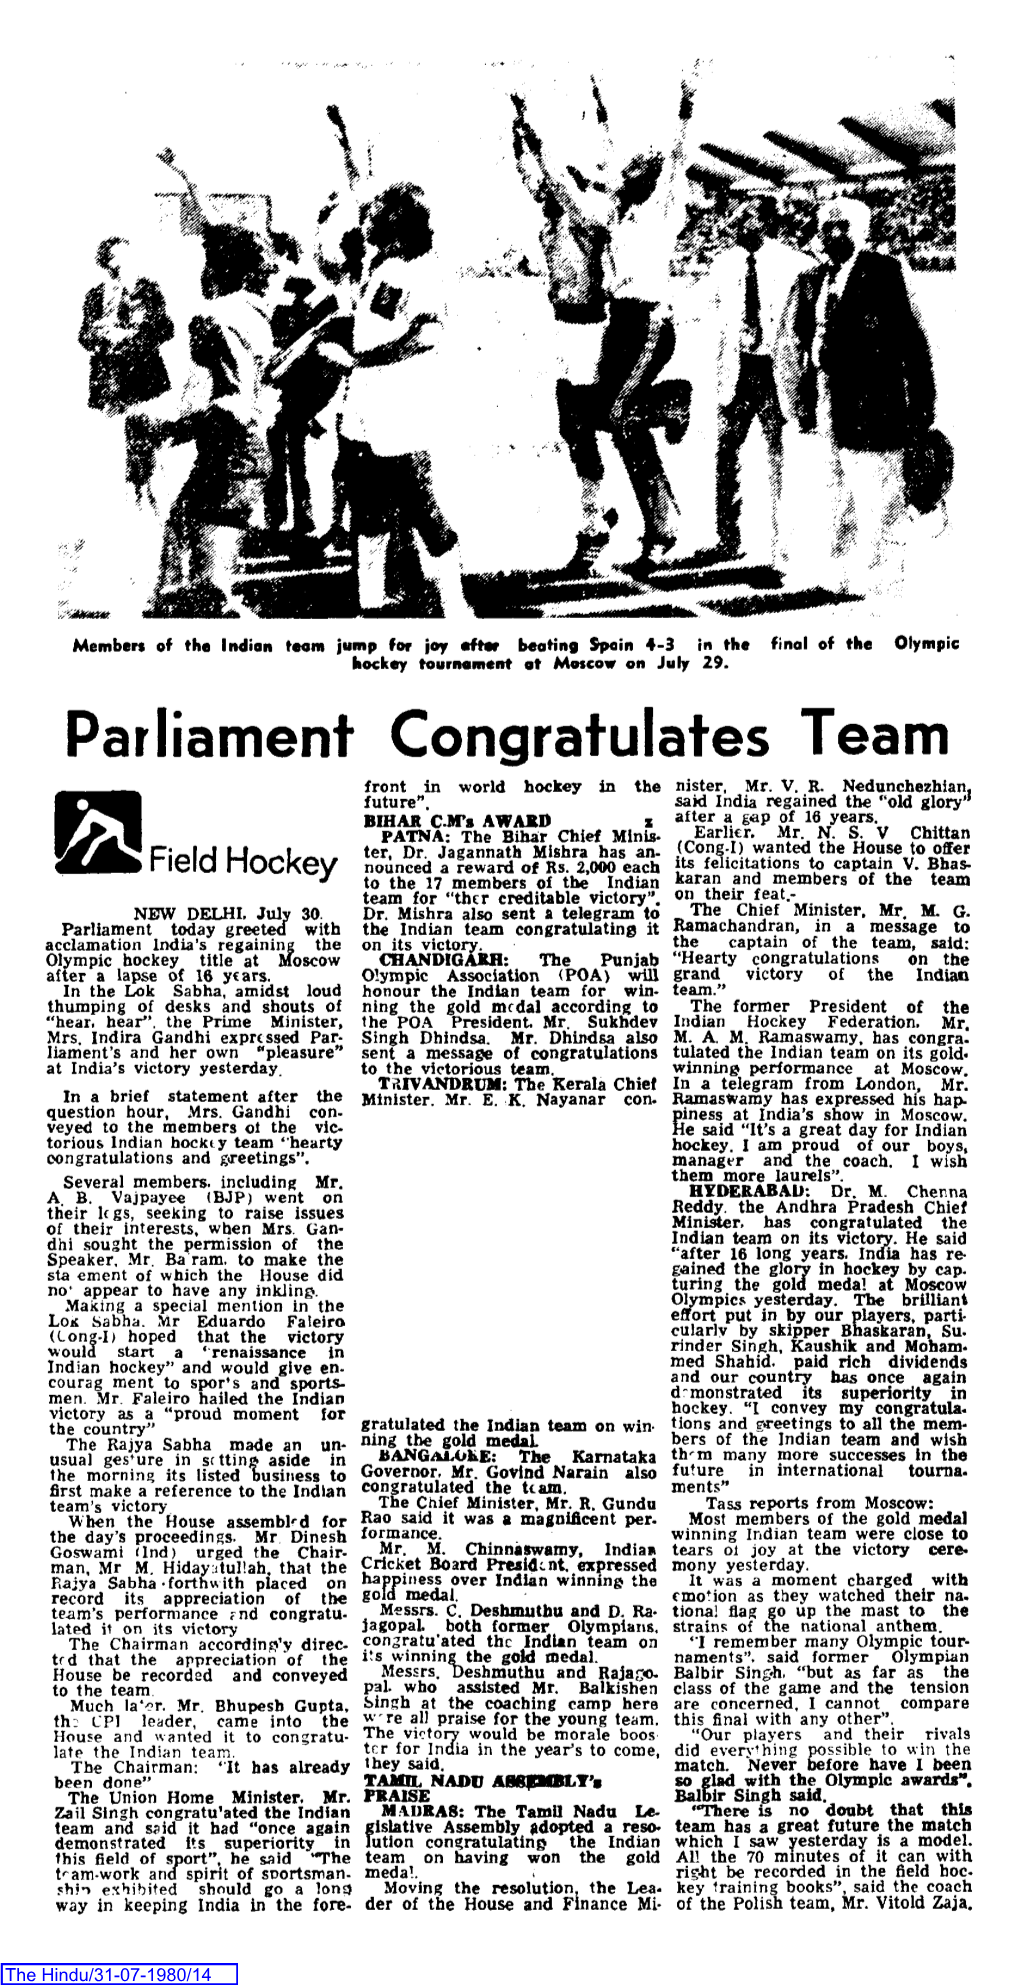 Parliament Congratulates Team Front in World Hockey in the Nister, Mr